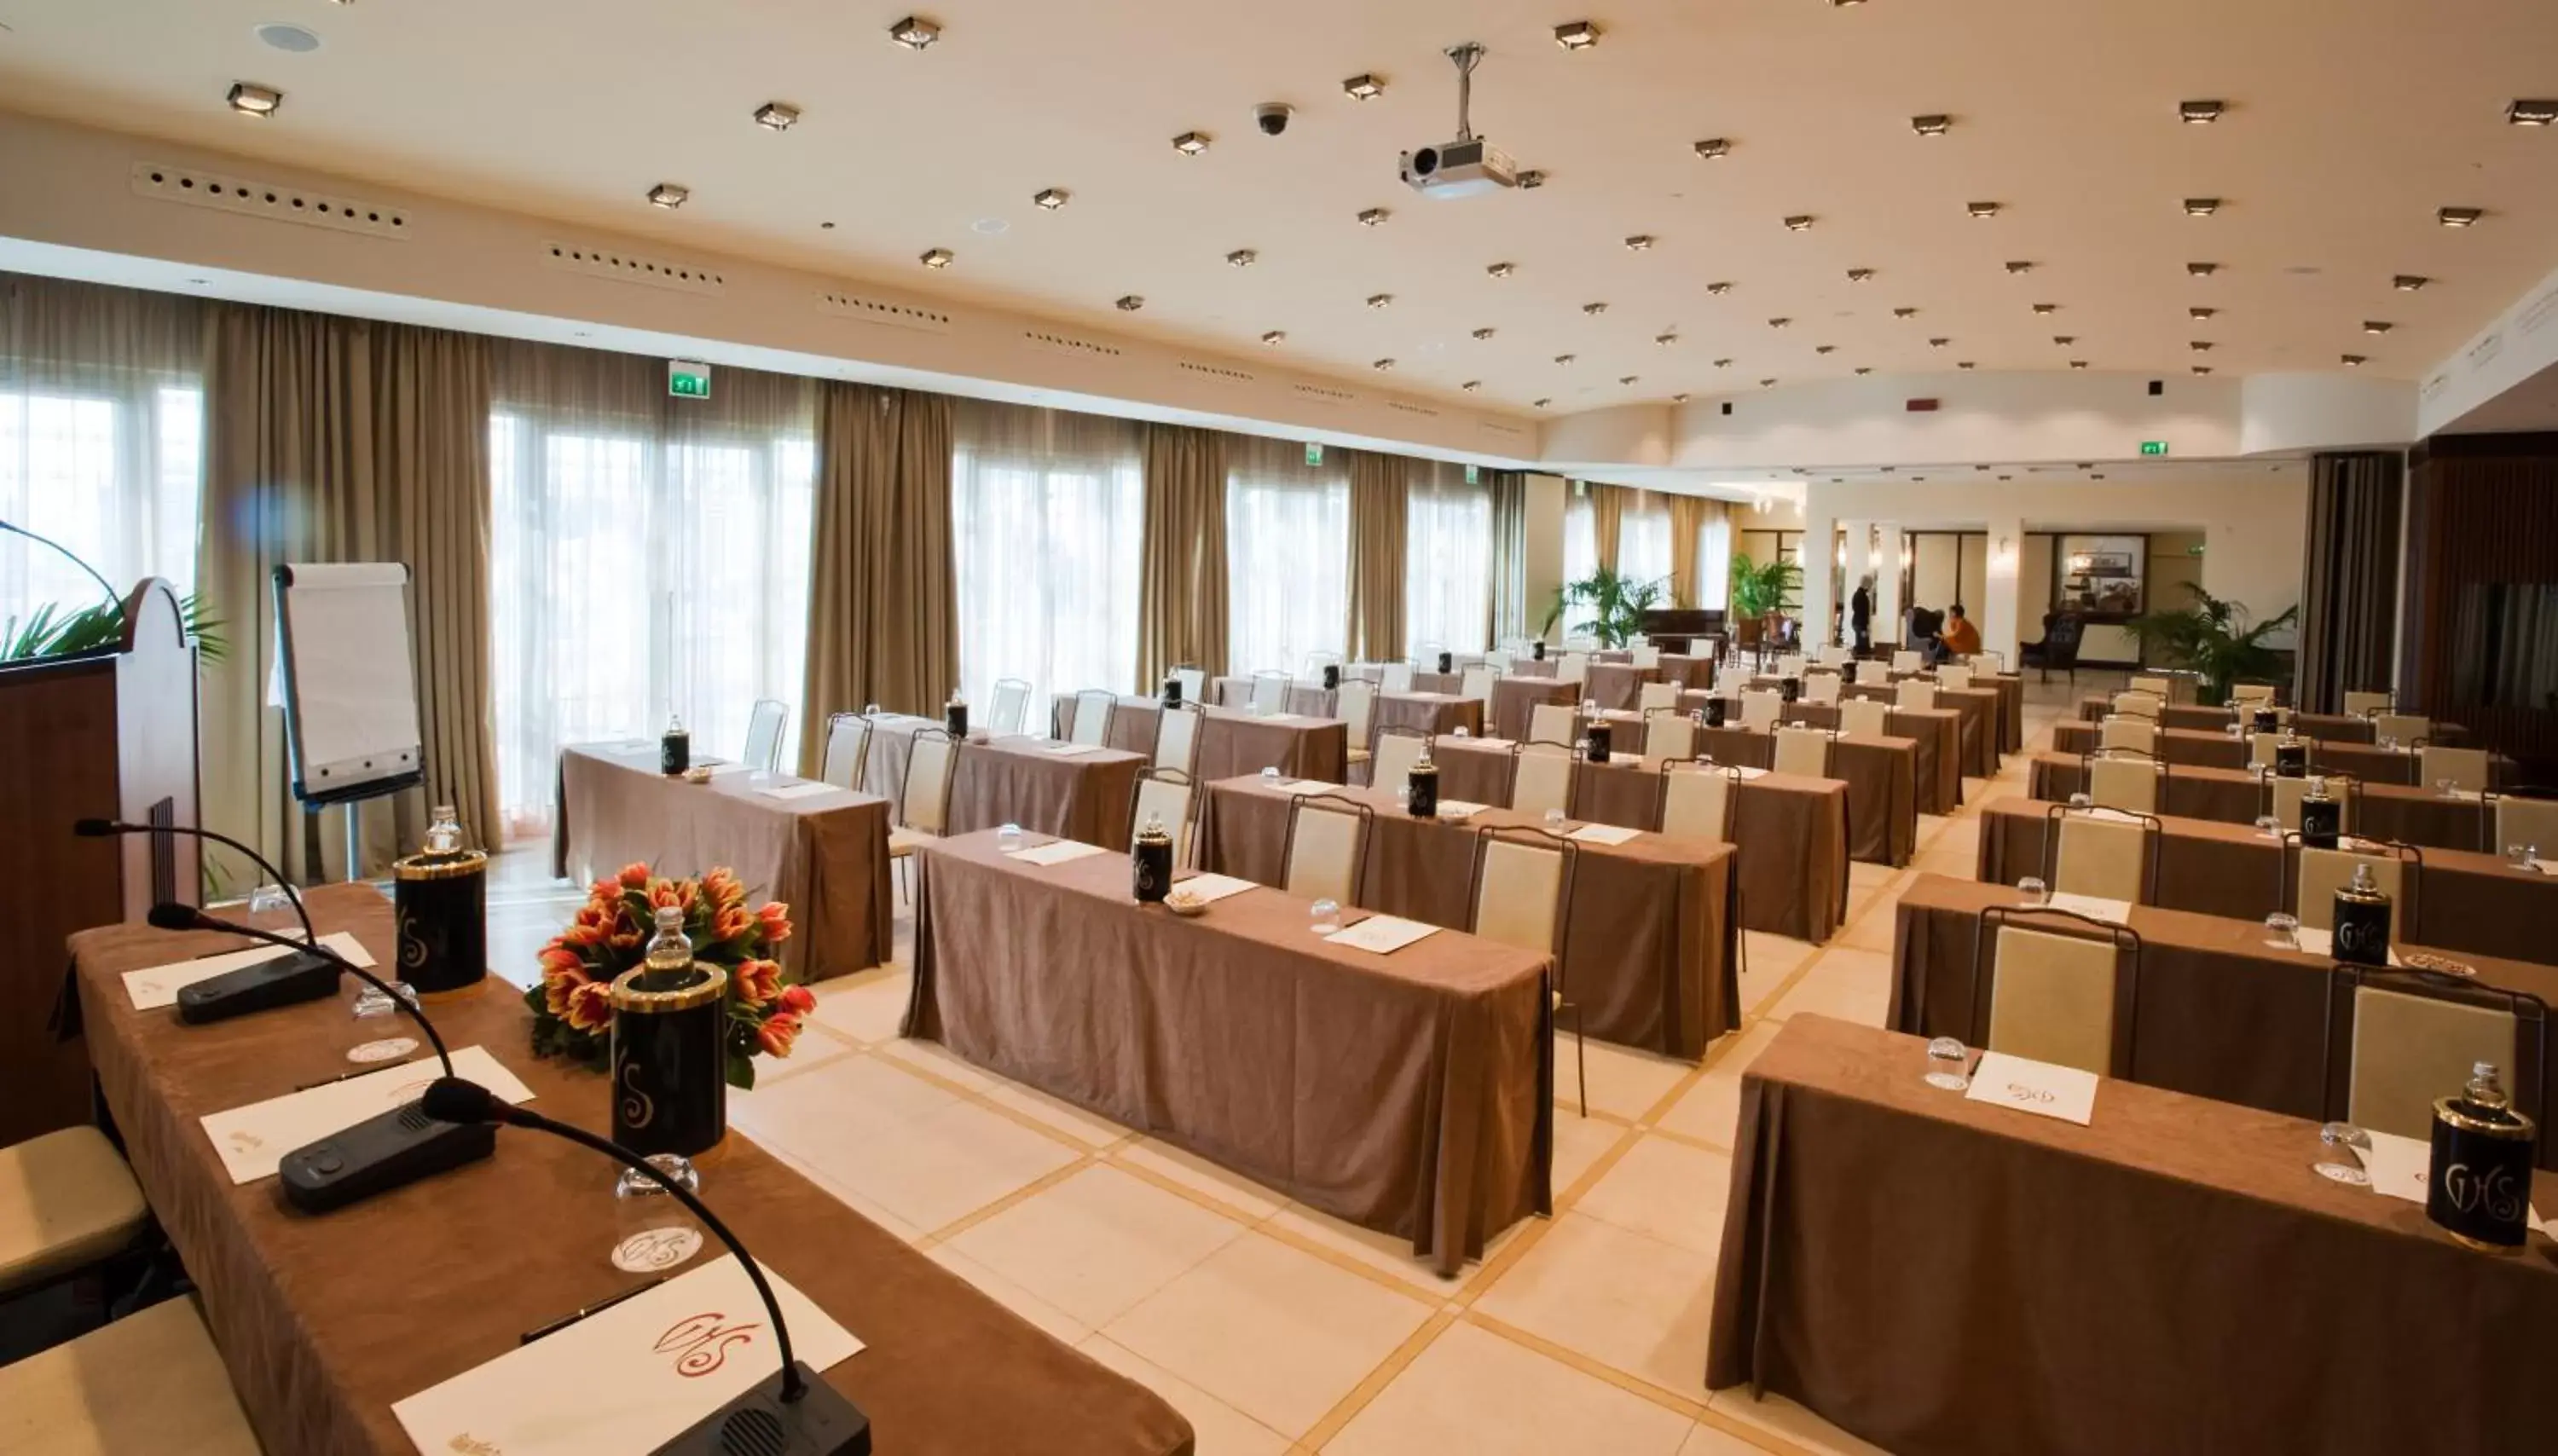 Business facilities in Grand Hotel Savoia